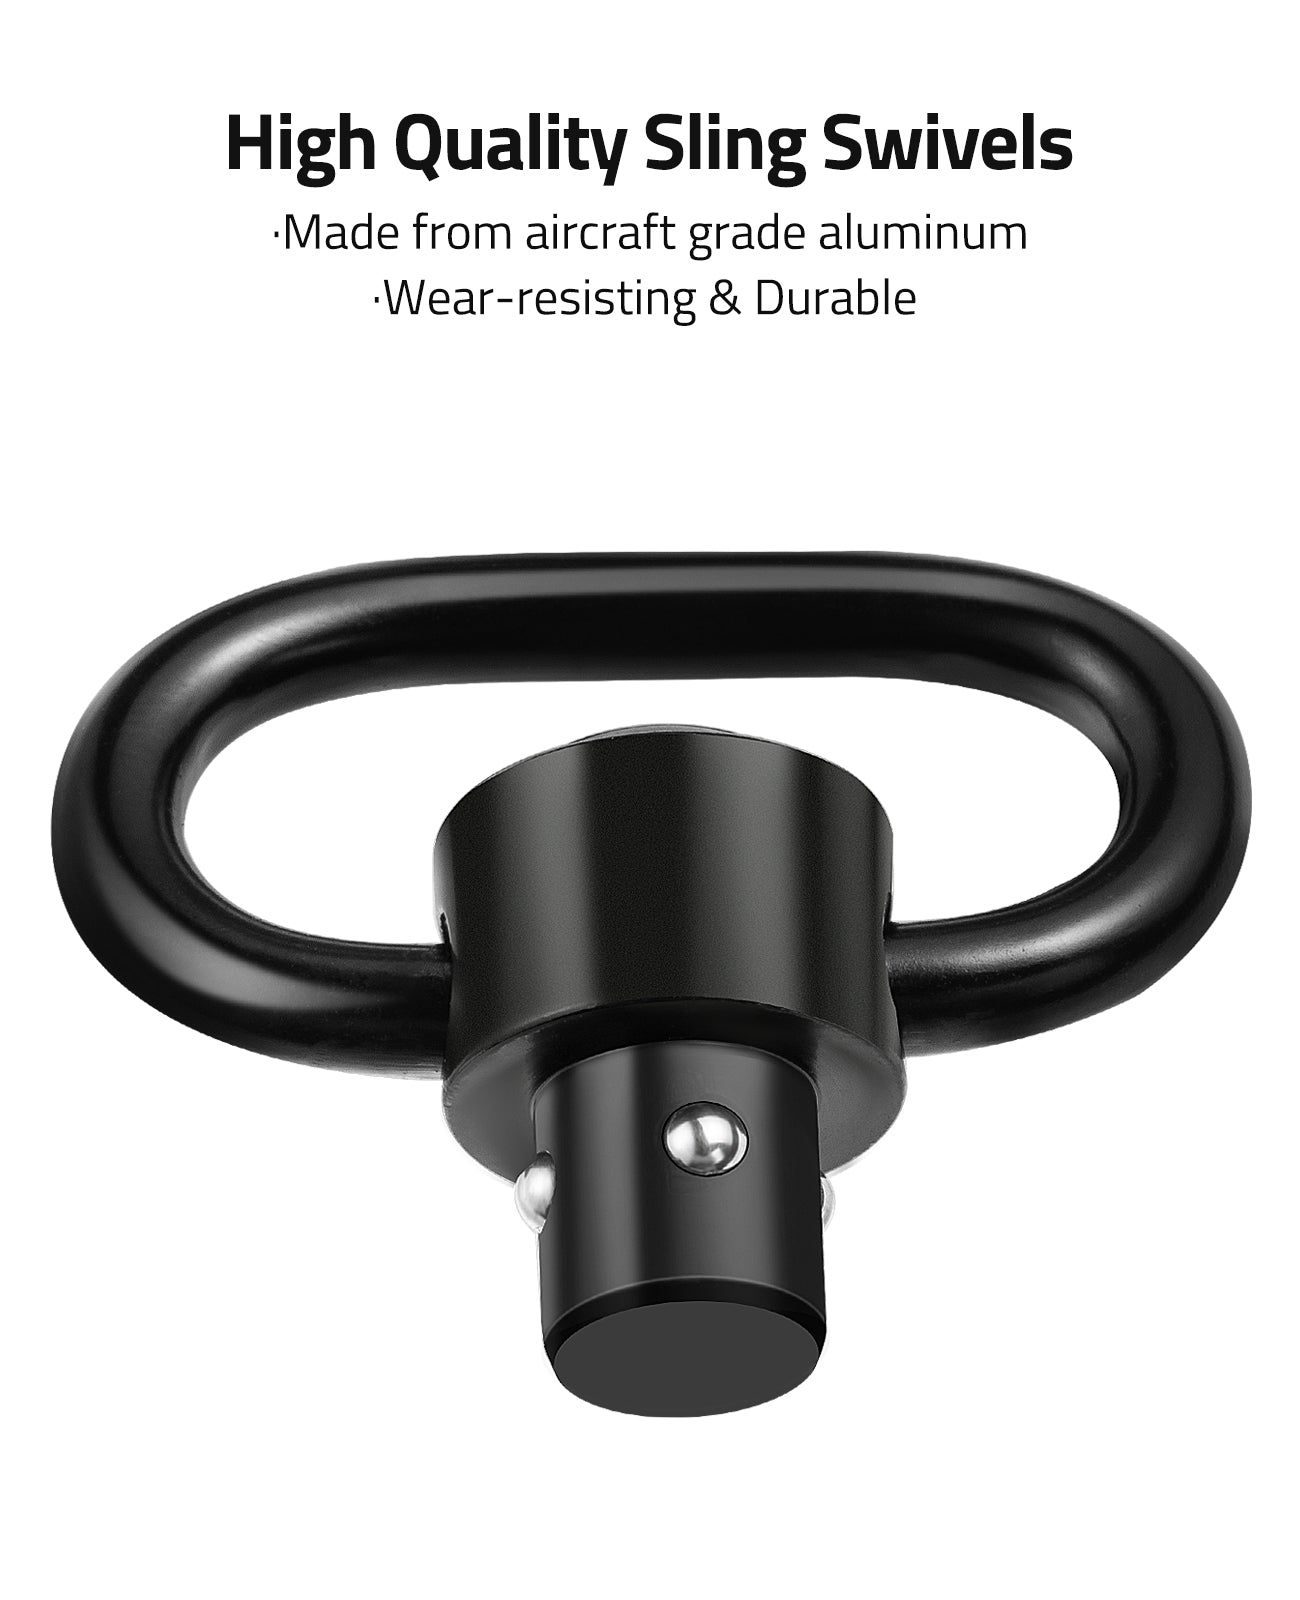 Compact and Lightweight Sling Swivels Size Details